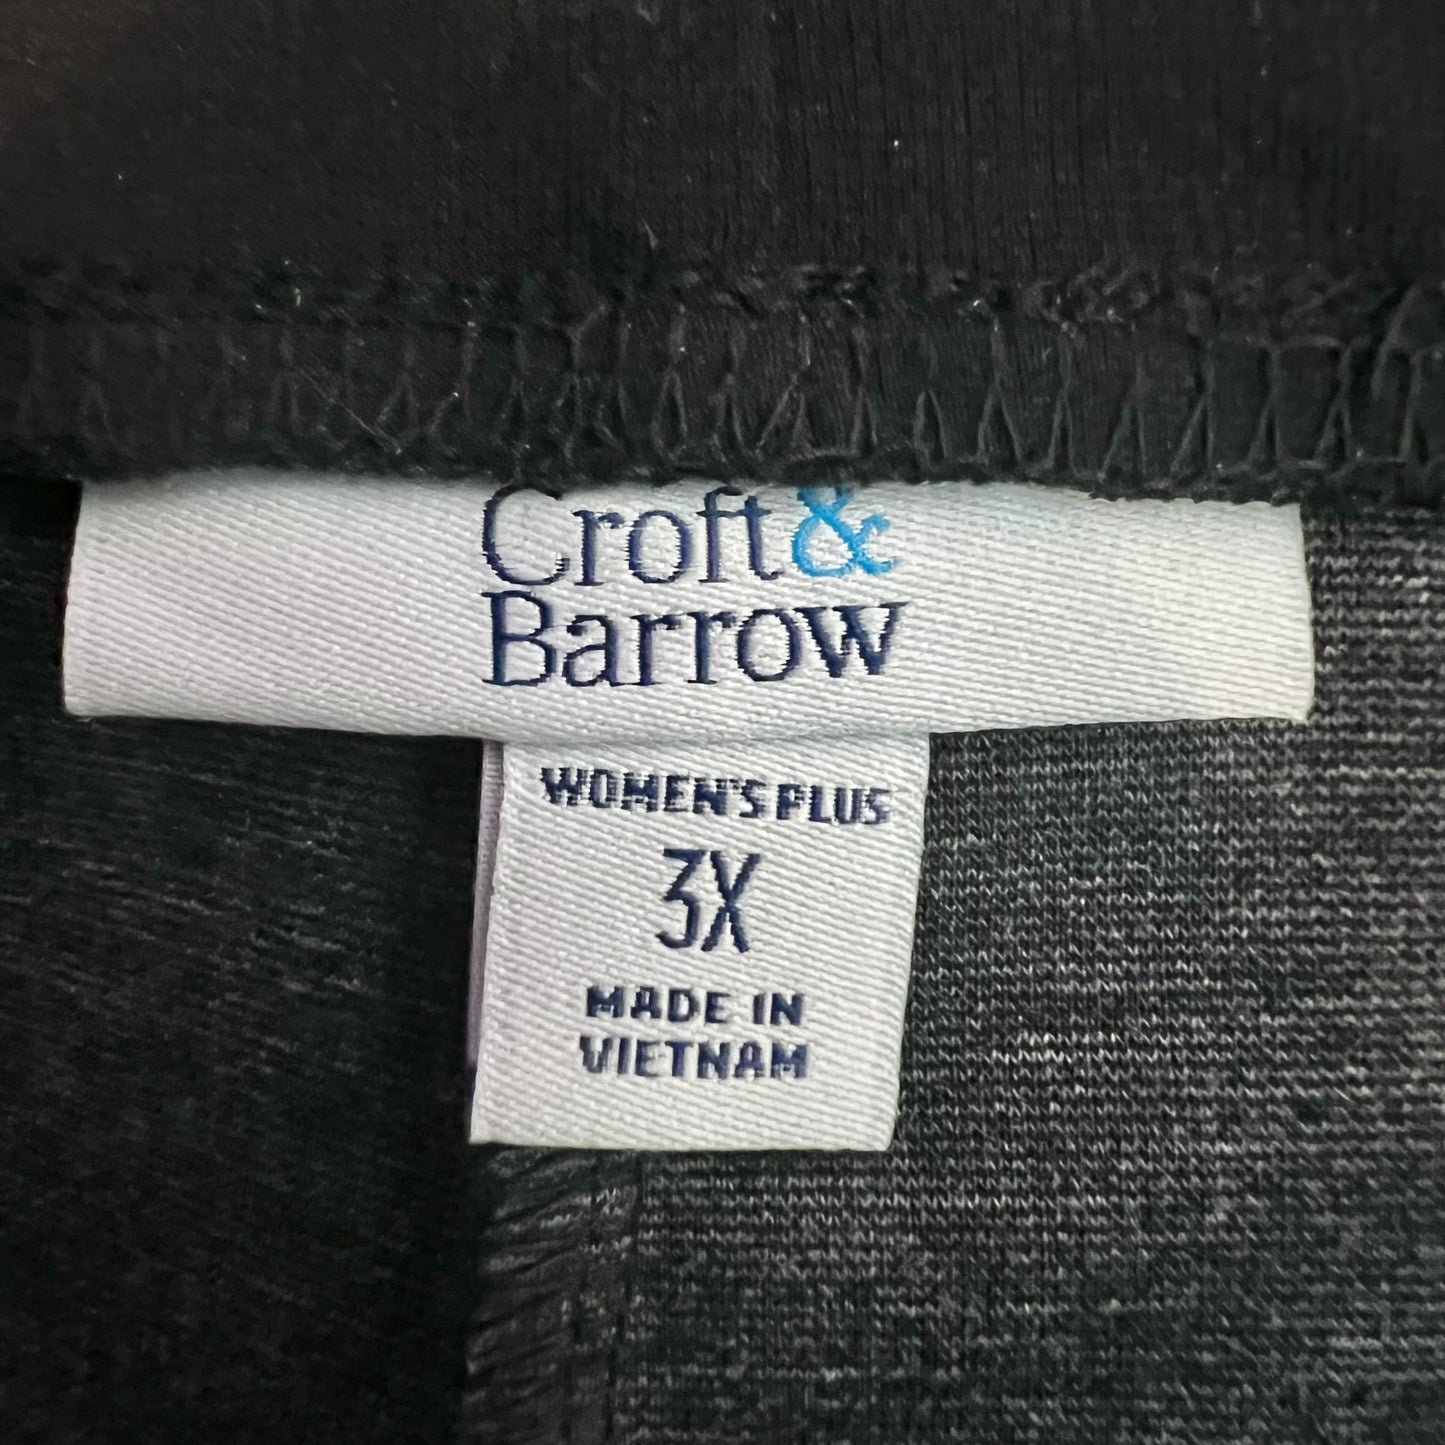 Pants Leggings By Croft And Barrow  Size: 3x